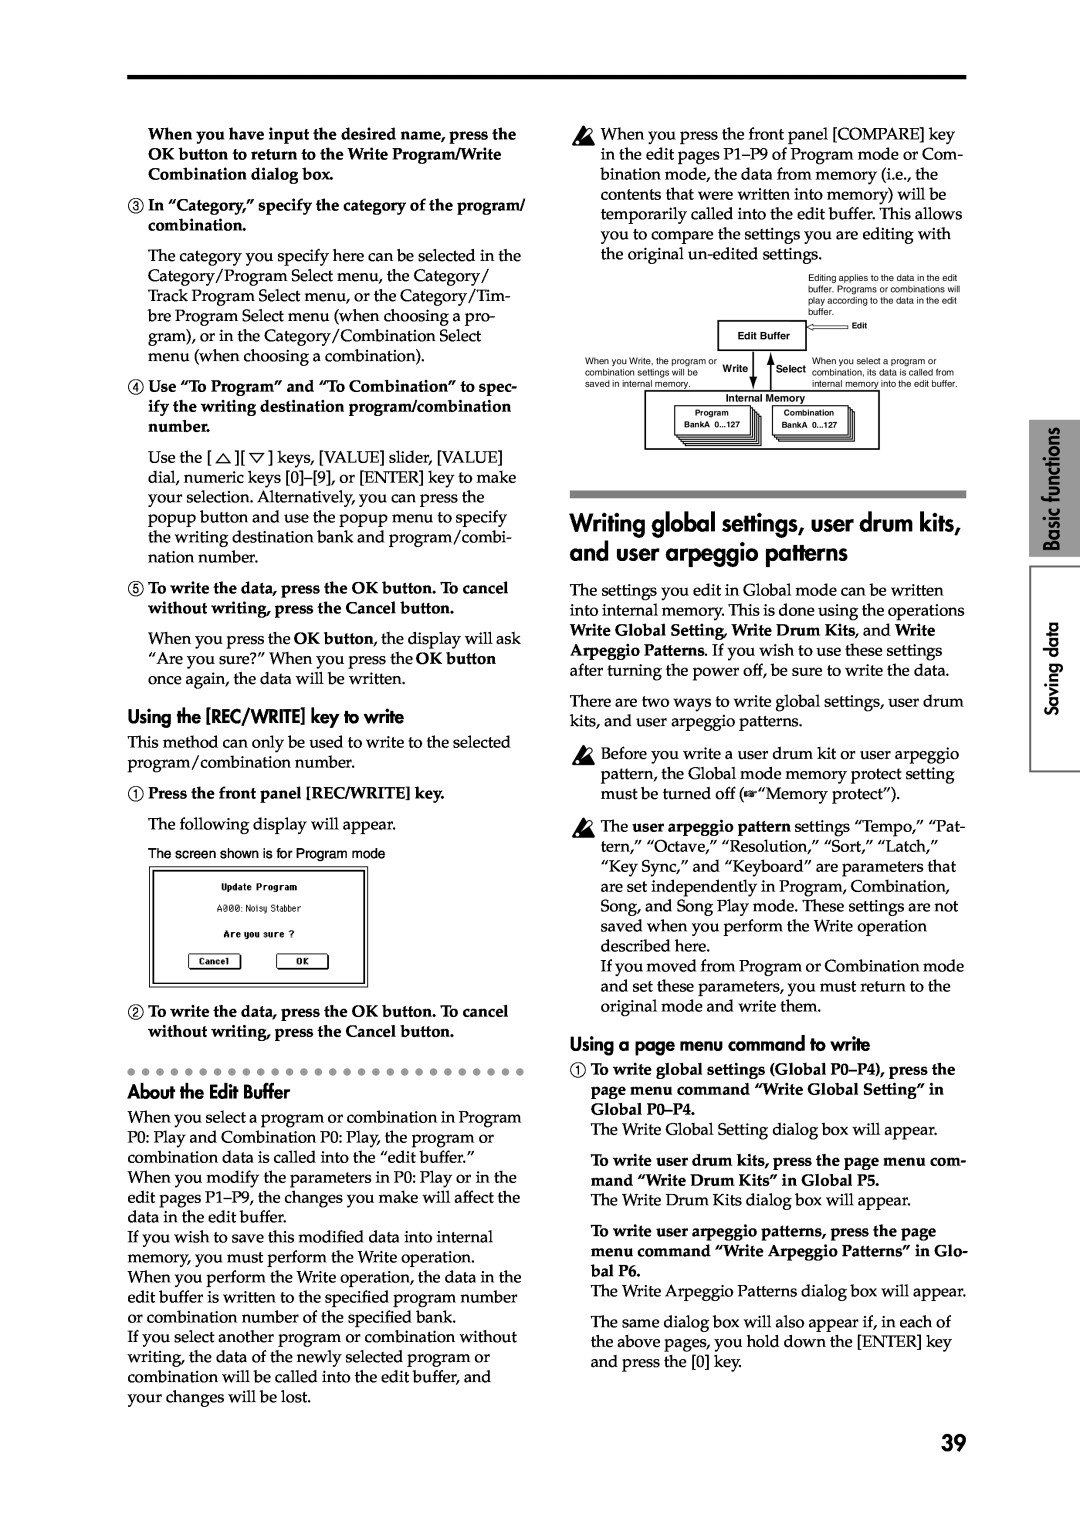 Korg Speaker System owner manual Saving data Basic functions, Using the REC/WRITE key to write, About the Edit Buffer 